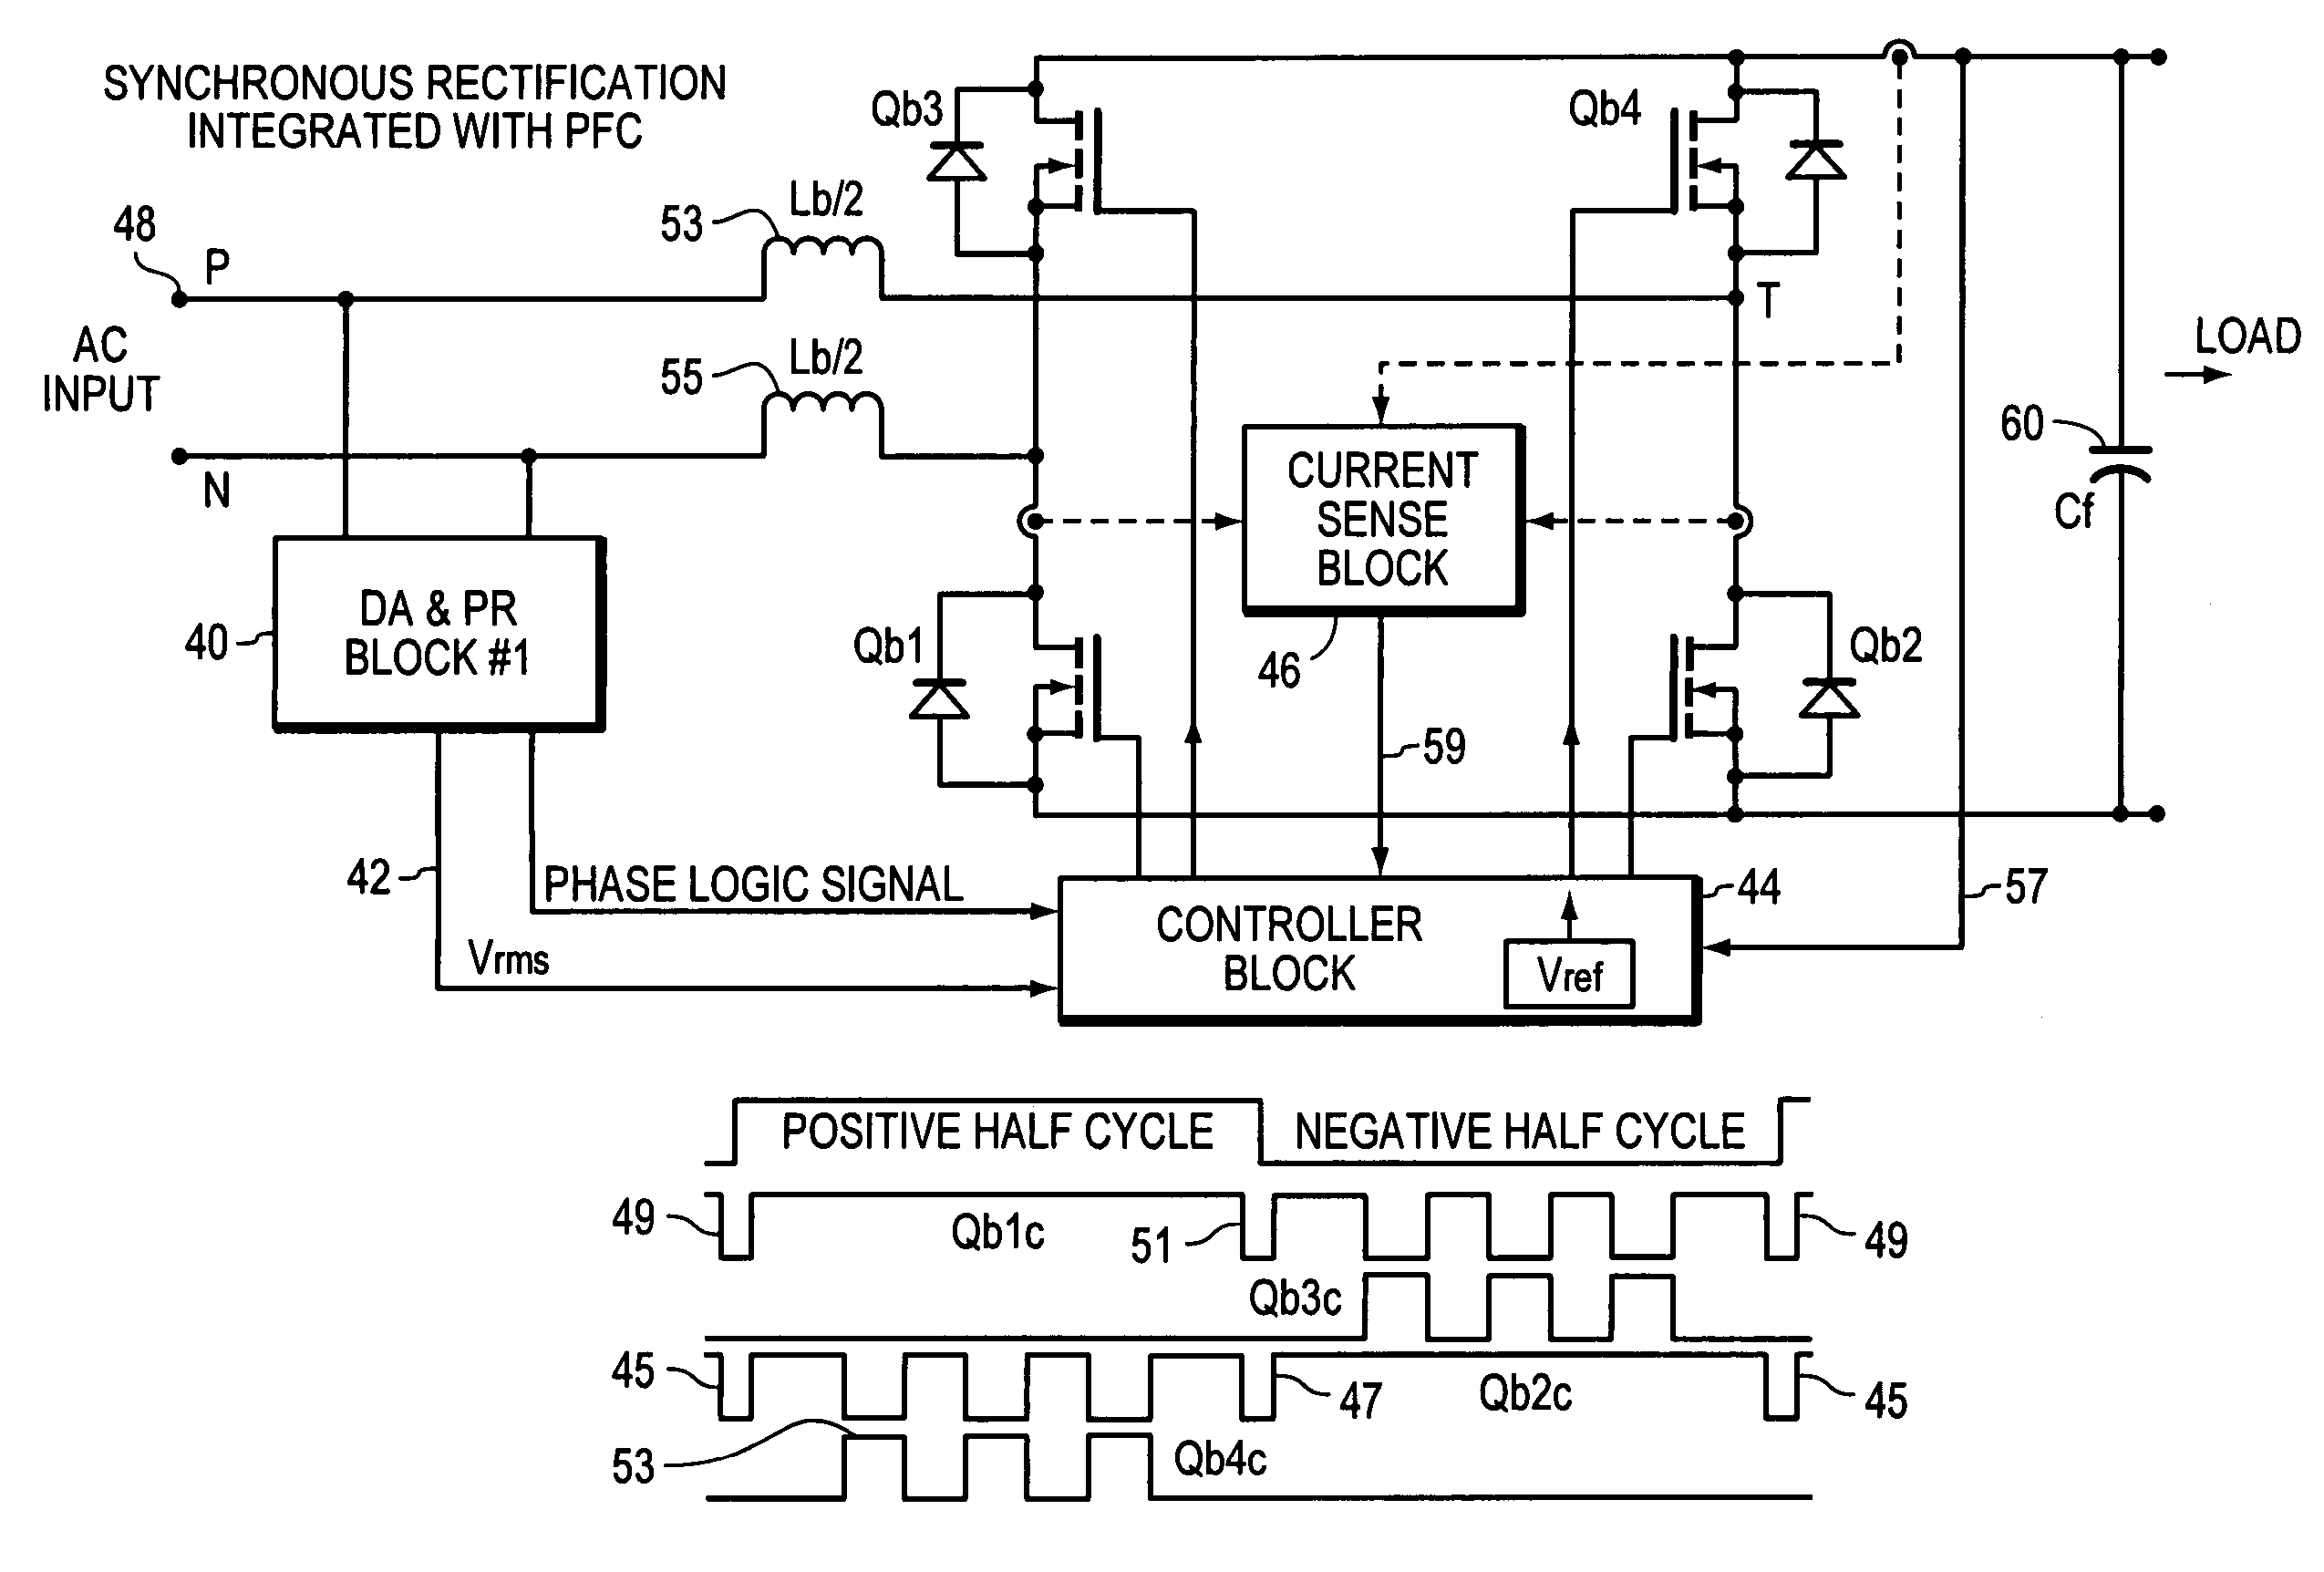 Vrms and rectified current sense full-bridge synchronous-rectification integrated with PFC